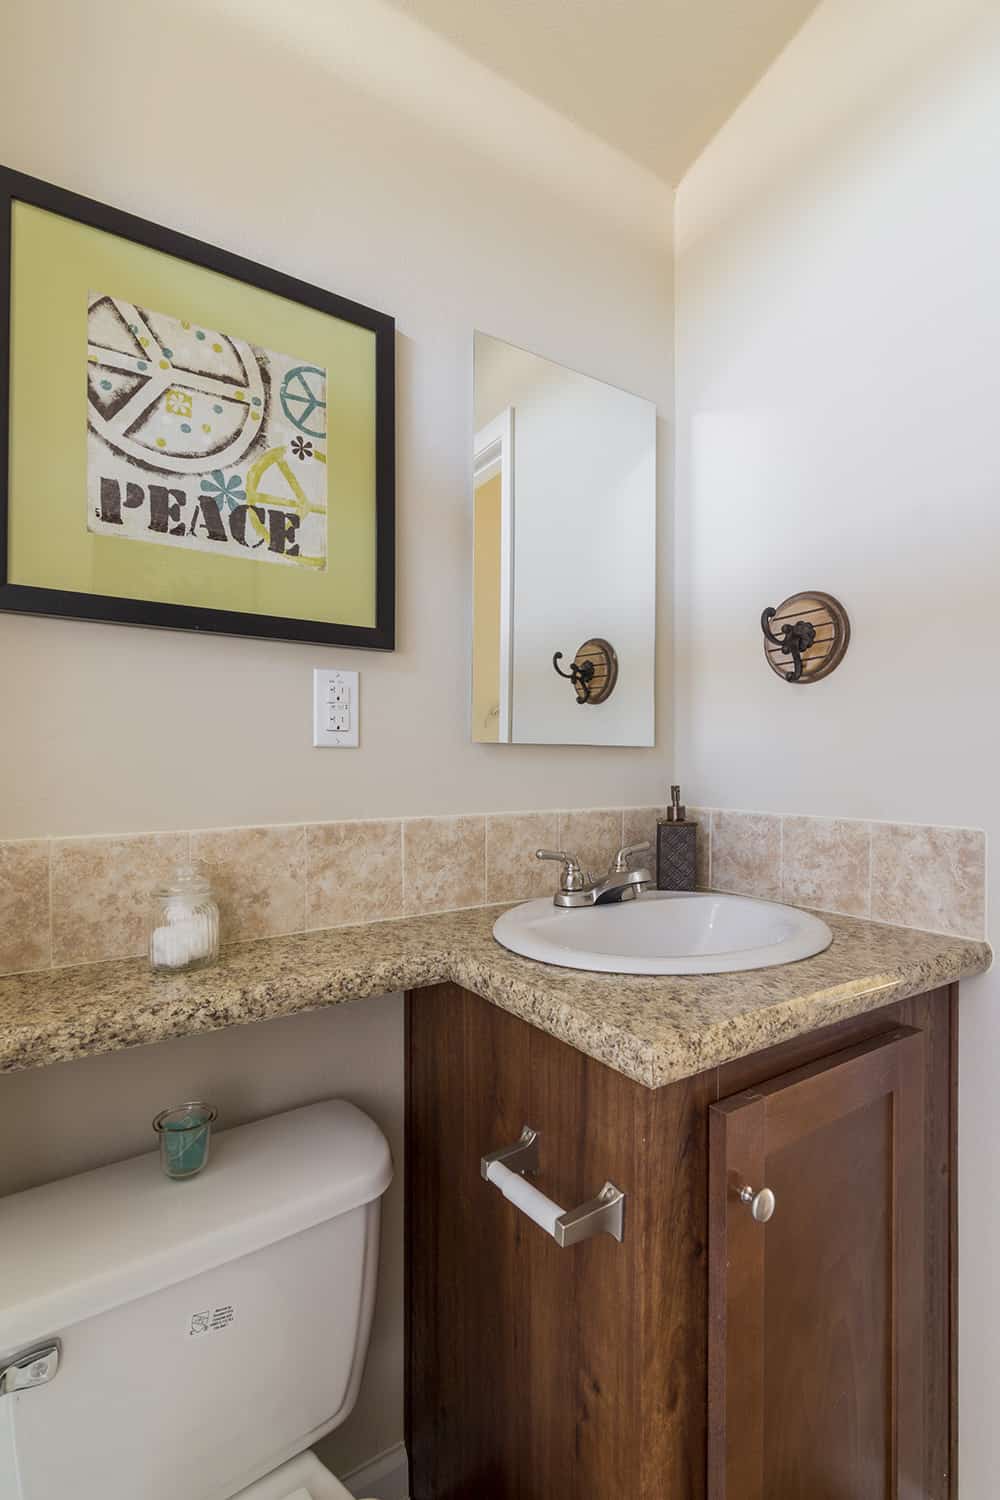 Bathroom detail from house model APH 522 made by Pratt Homes, Tyler, Texas